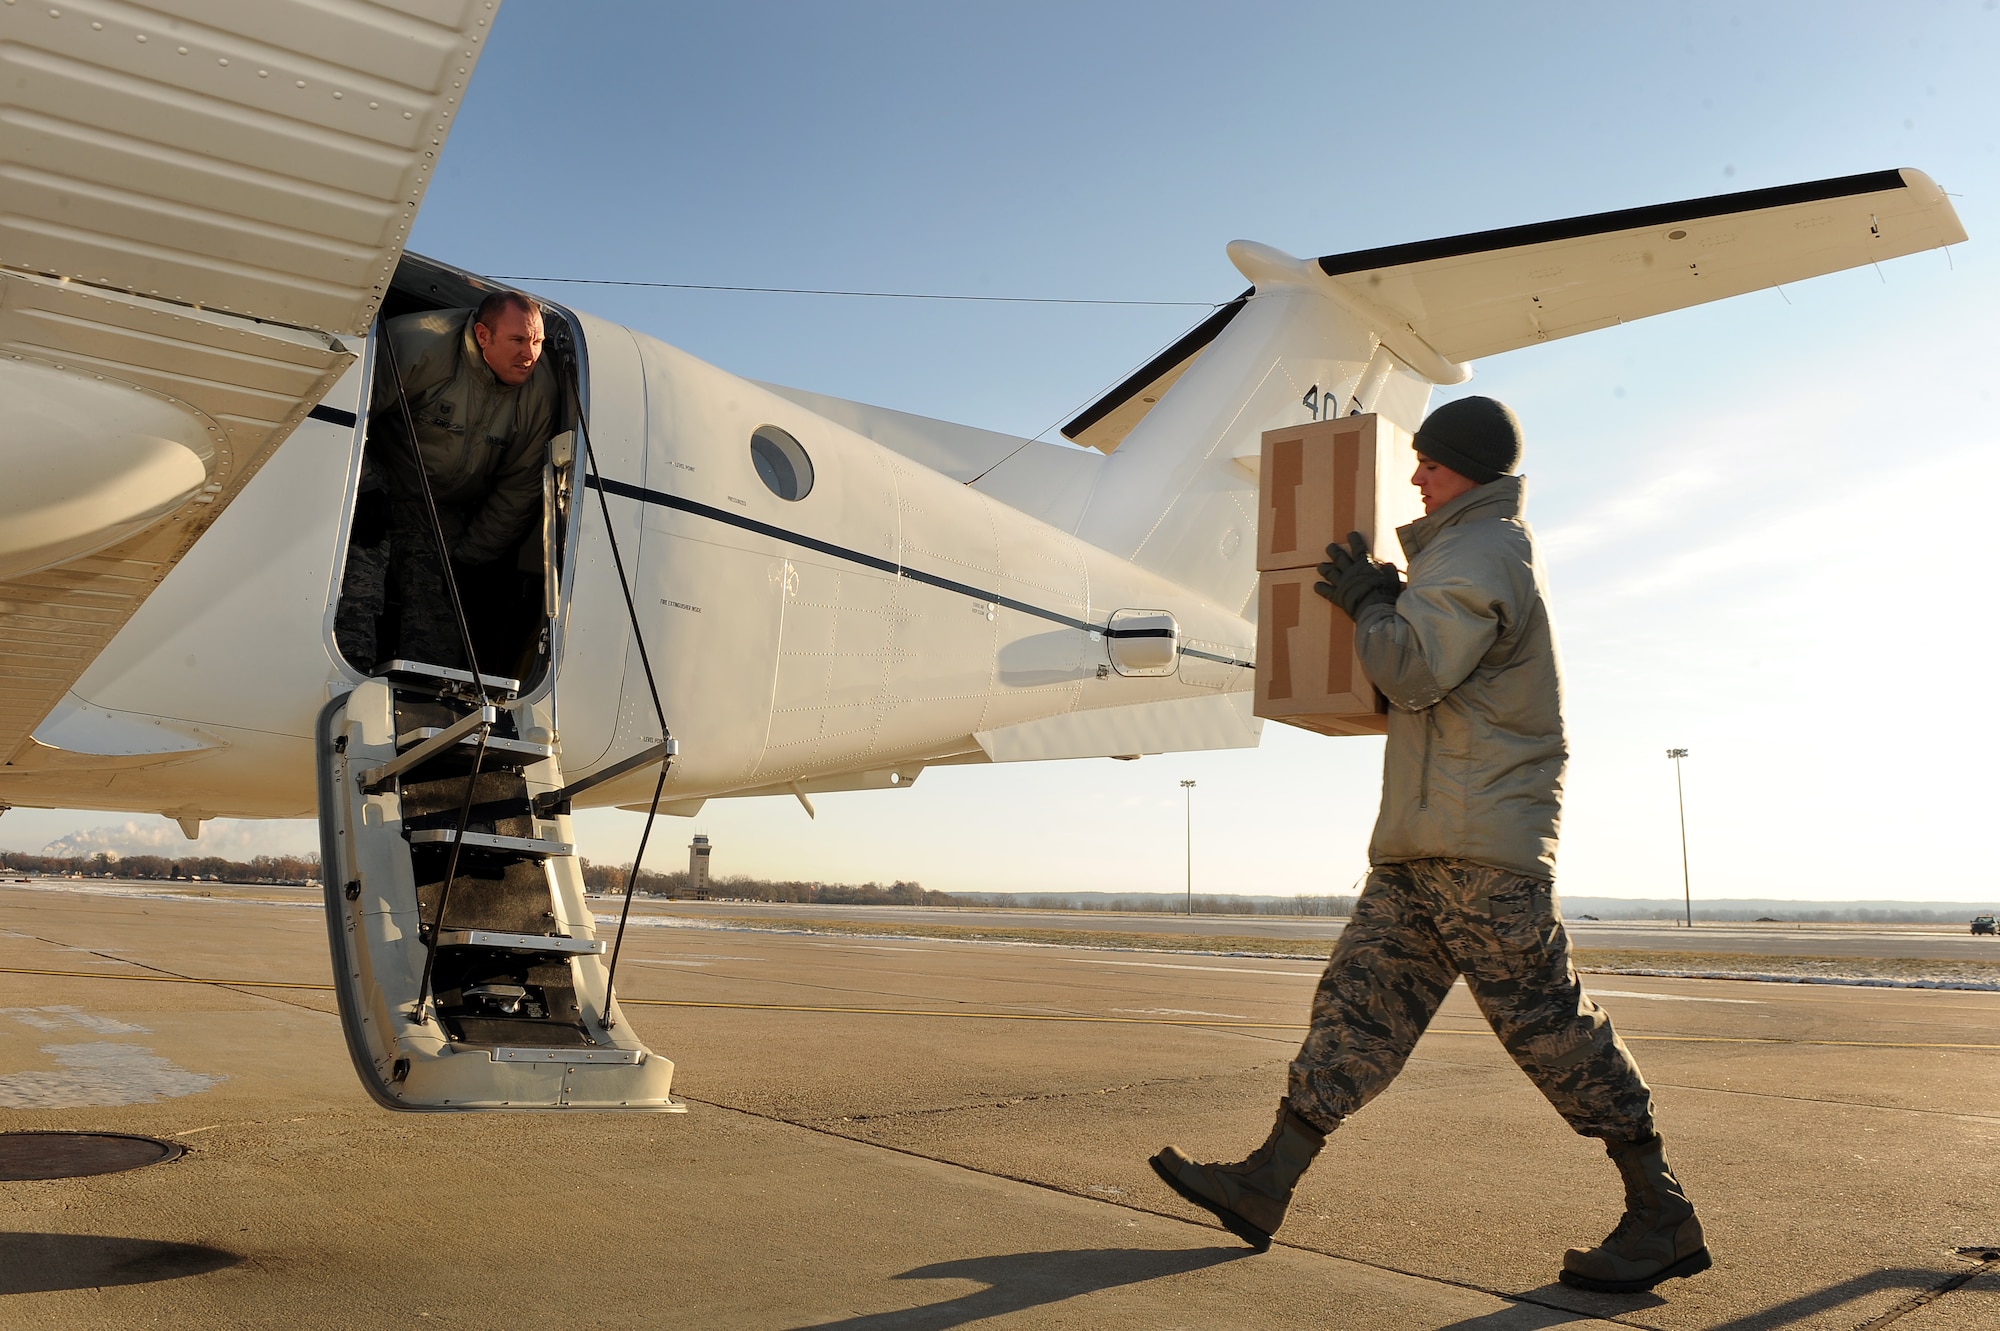 U.S. Air Force Staff Sgt. Jonathan Clay, a Defense Courier Station Offutt courier, hands classified packages to fellow courier, U.S. Air Force Tech Sgt. John King, on the flightline at Offutt Air Force Base, Neb., Nov. 18, 2014. The Defense Courier Station Offutt is tasked with servicing nine states and 130 customers, comprising the second largest geographical area of responsibility for all of the 18 worldwide defense courier units. (U.S. Air Force photo by Josh Plueger/Released)